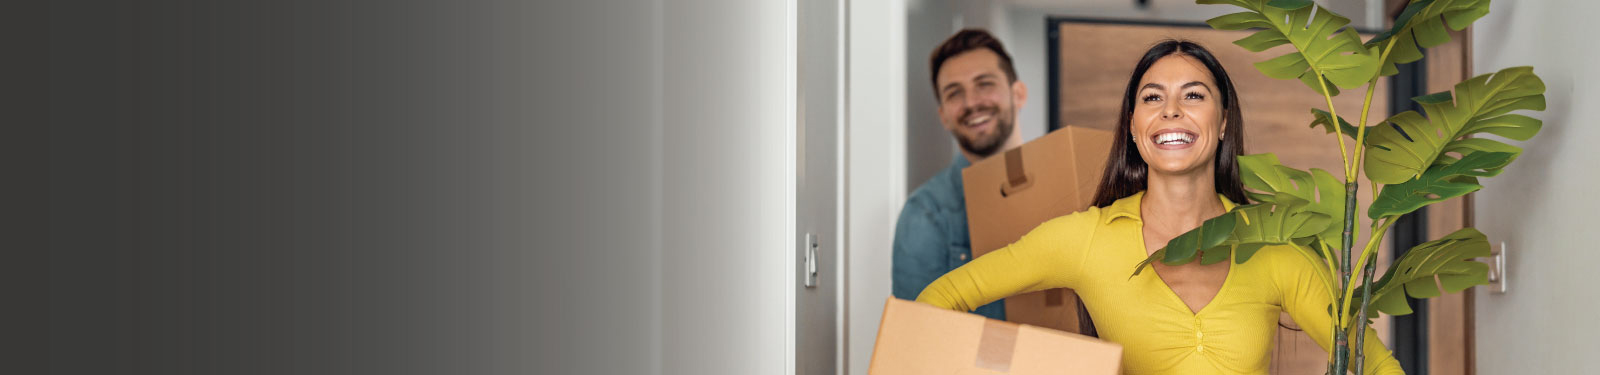 Man and woman with boxes moving into their new place and smiling.